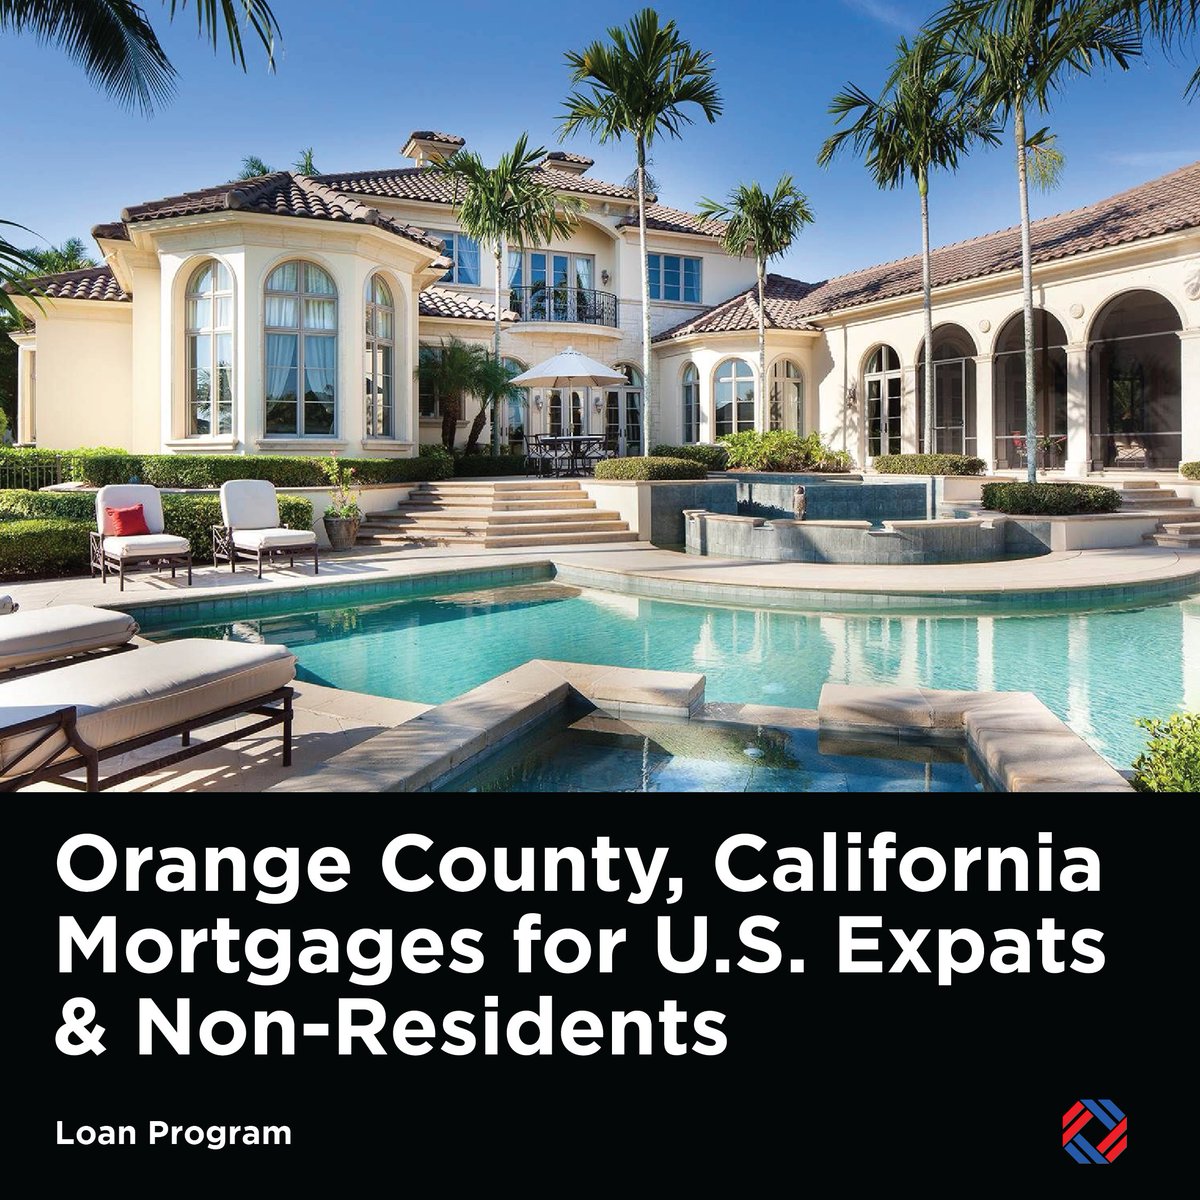 Orange County, California, known for its high home values and consistent appreciation rates, it's a top choice for both residents and investors alike. 🏠

hello@americamortgages.com

#OrangeCounty #CaliforniaRealEstate #HomeValues #PropertyAppreciation #RealEstateMarket